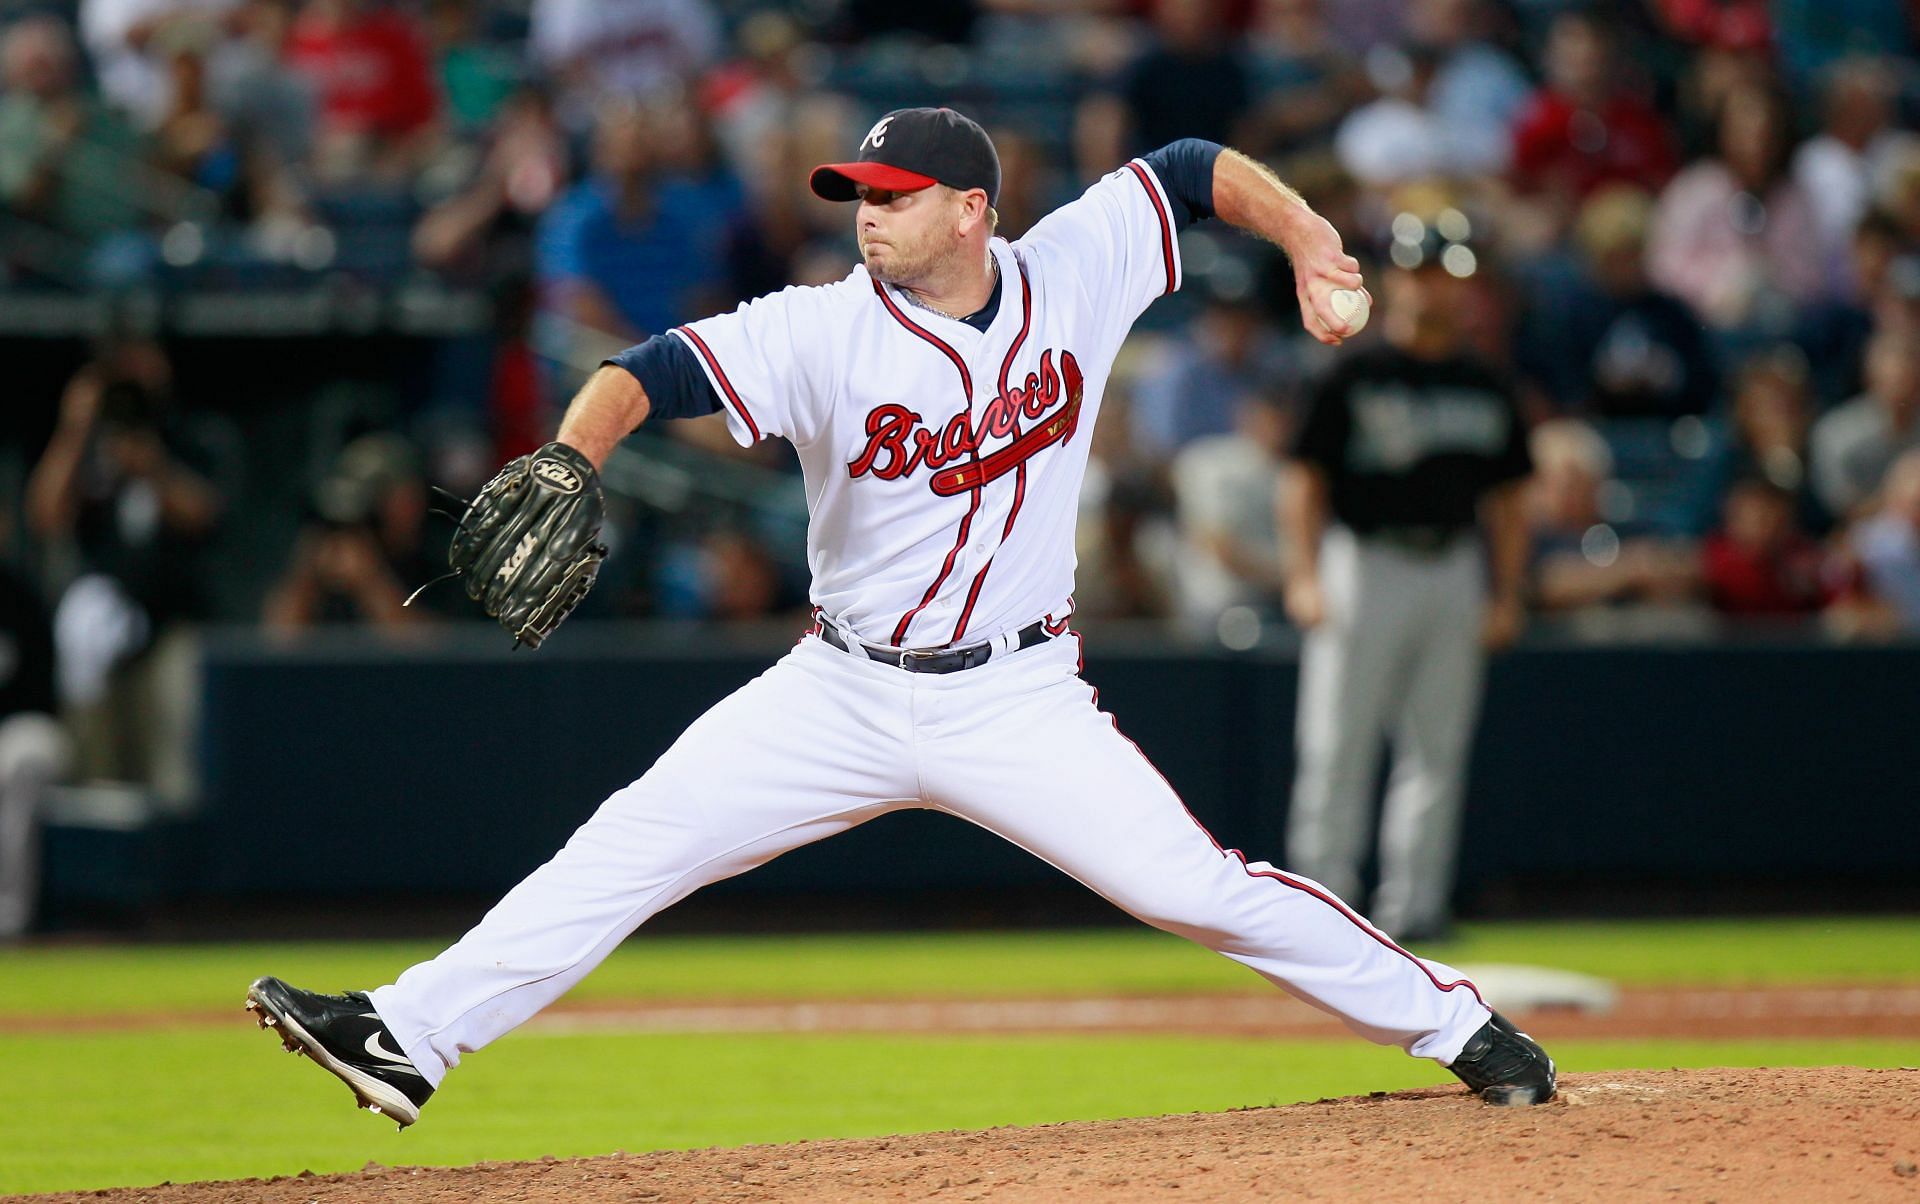 Billy Wagner Reflects on His Profession, Collecting - Sports Collectors  Digest